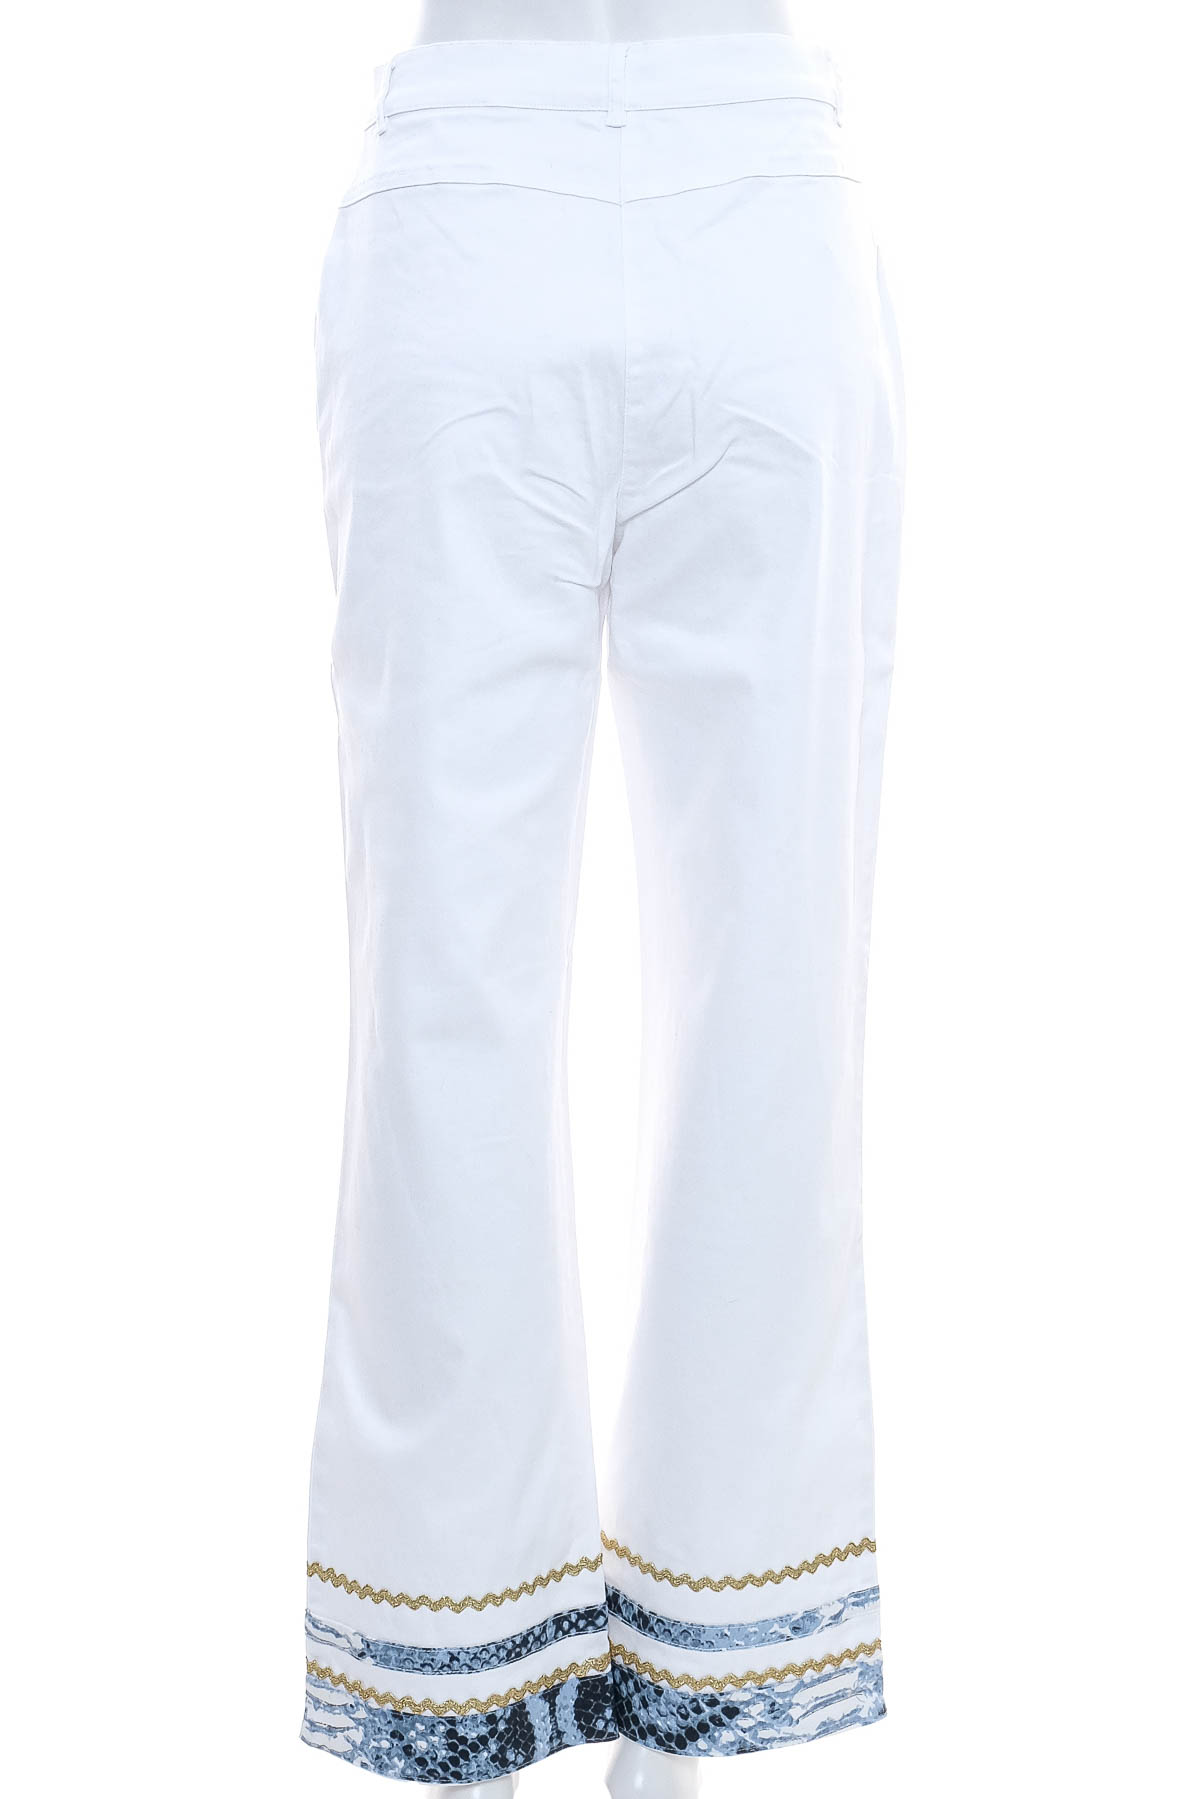 Women's trousers - Together - 1